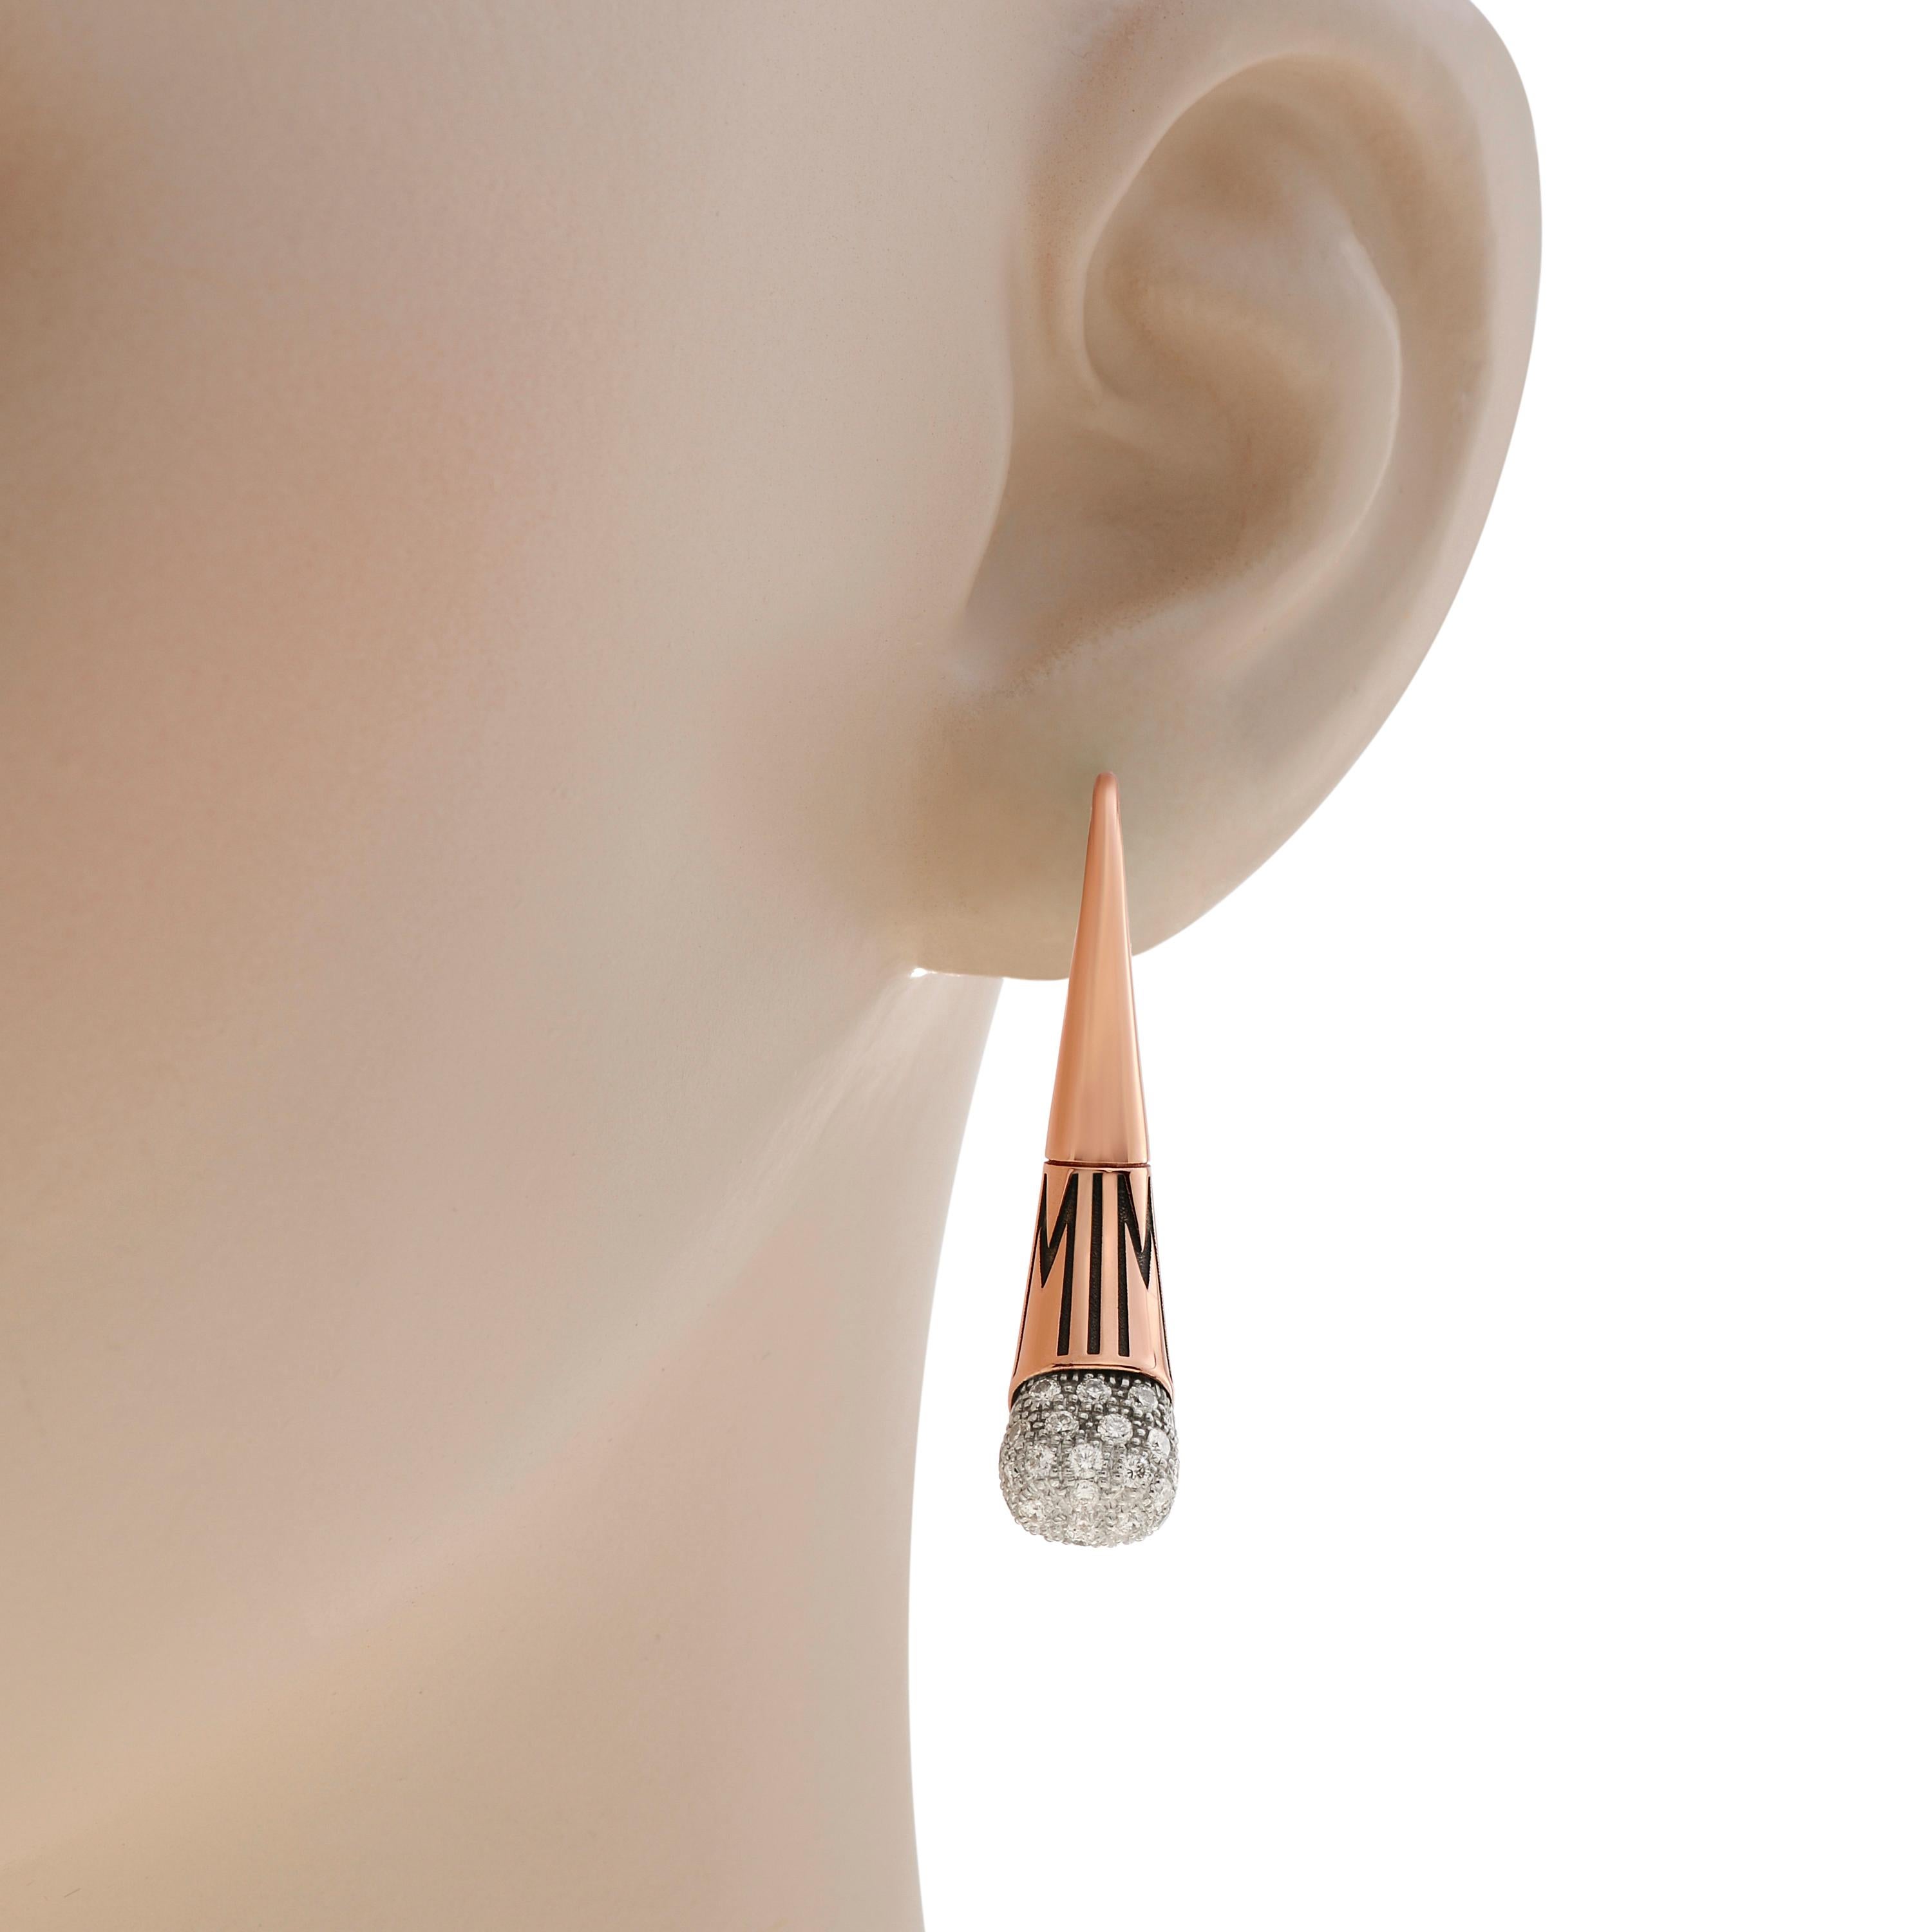 Mimi Milano Tam Tam 18k Rose & White Gold Diamond Drop Earrings In New Condition For Sale In New York, NY